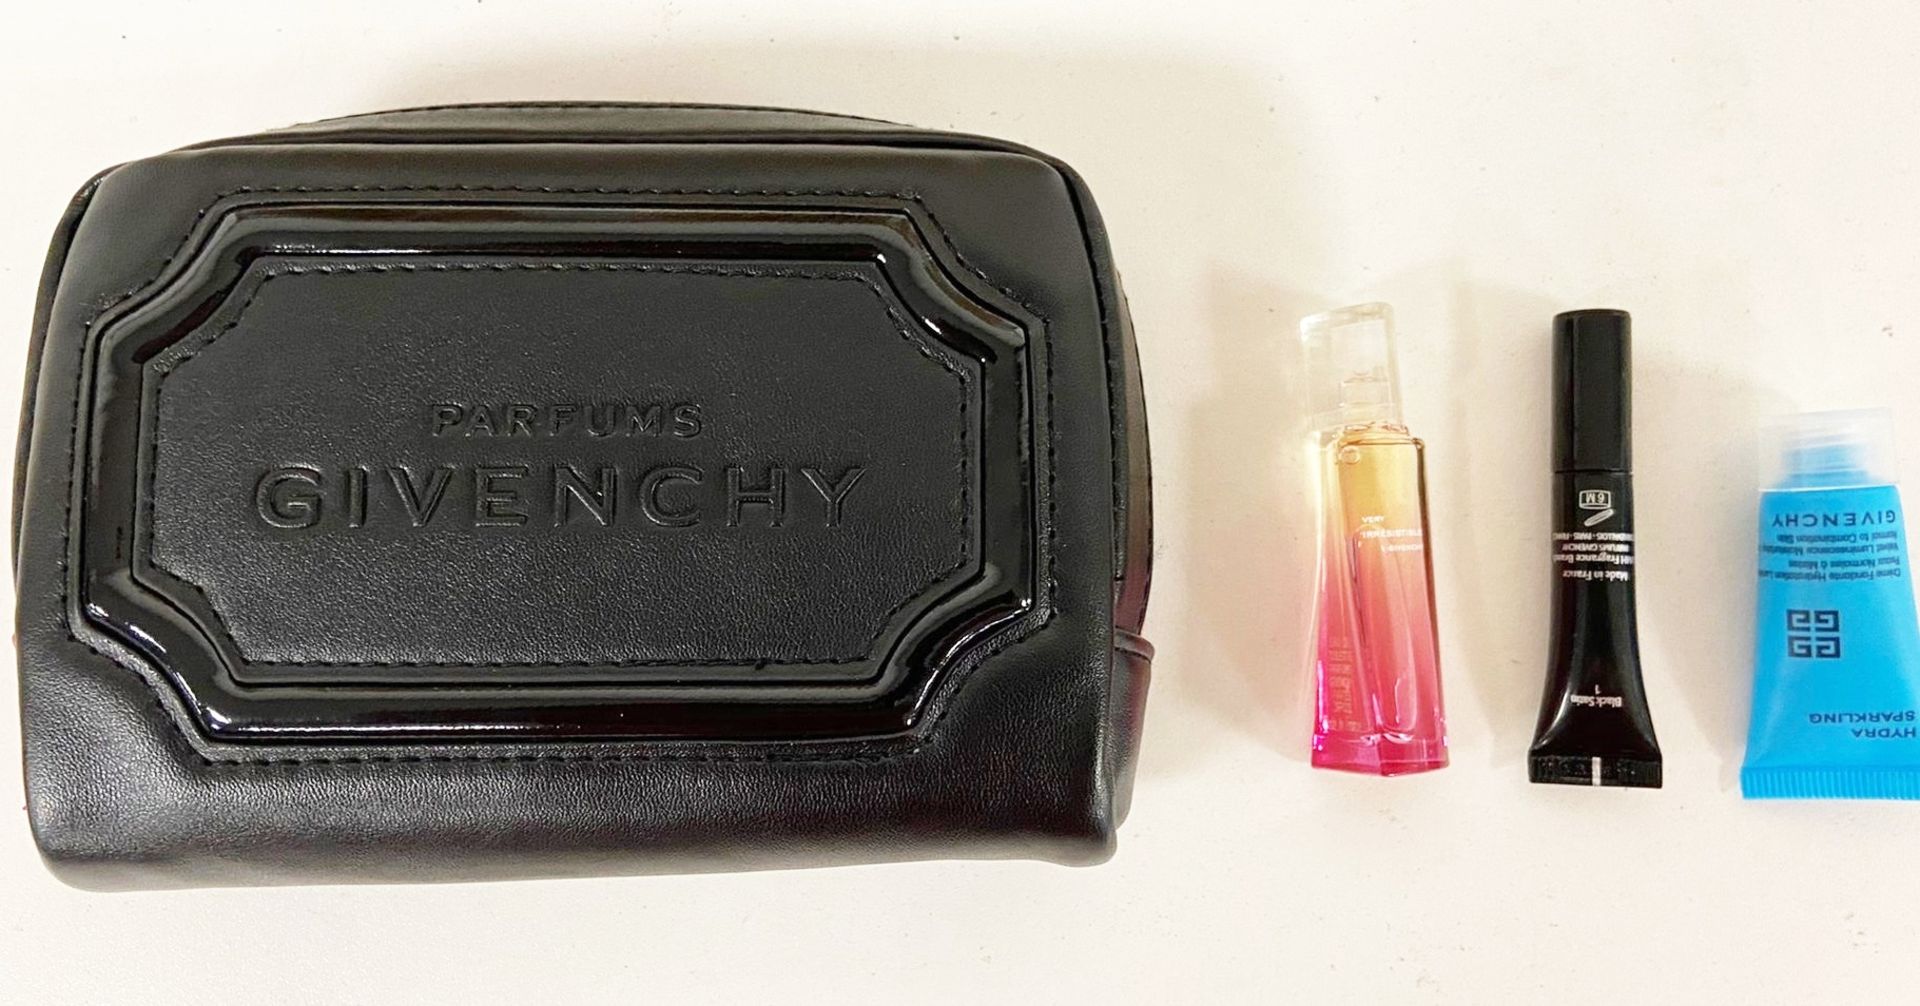 10 x GIVENCHY Parfums Kits With Carrying Case And Irresistible Spray - Image 4 of 4